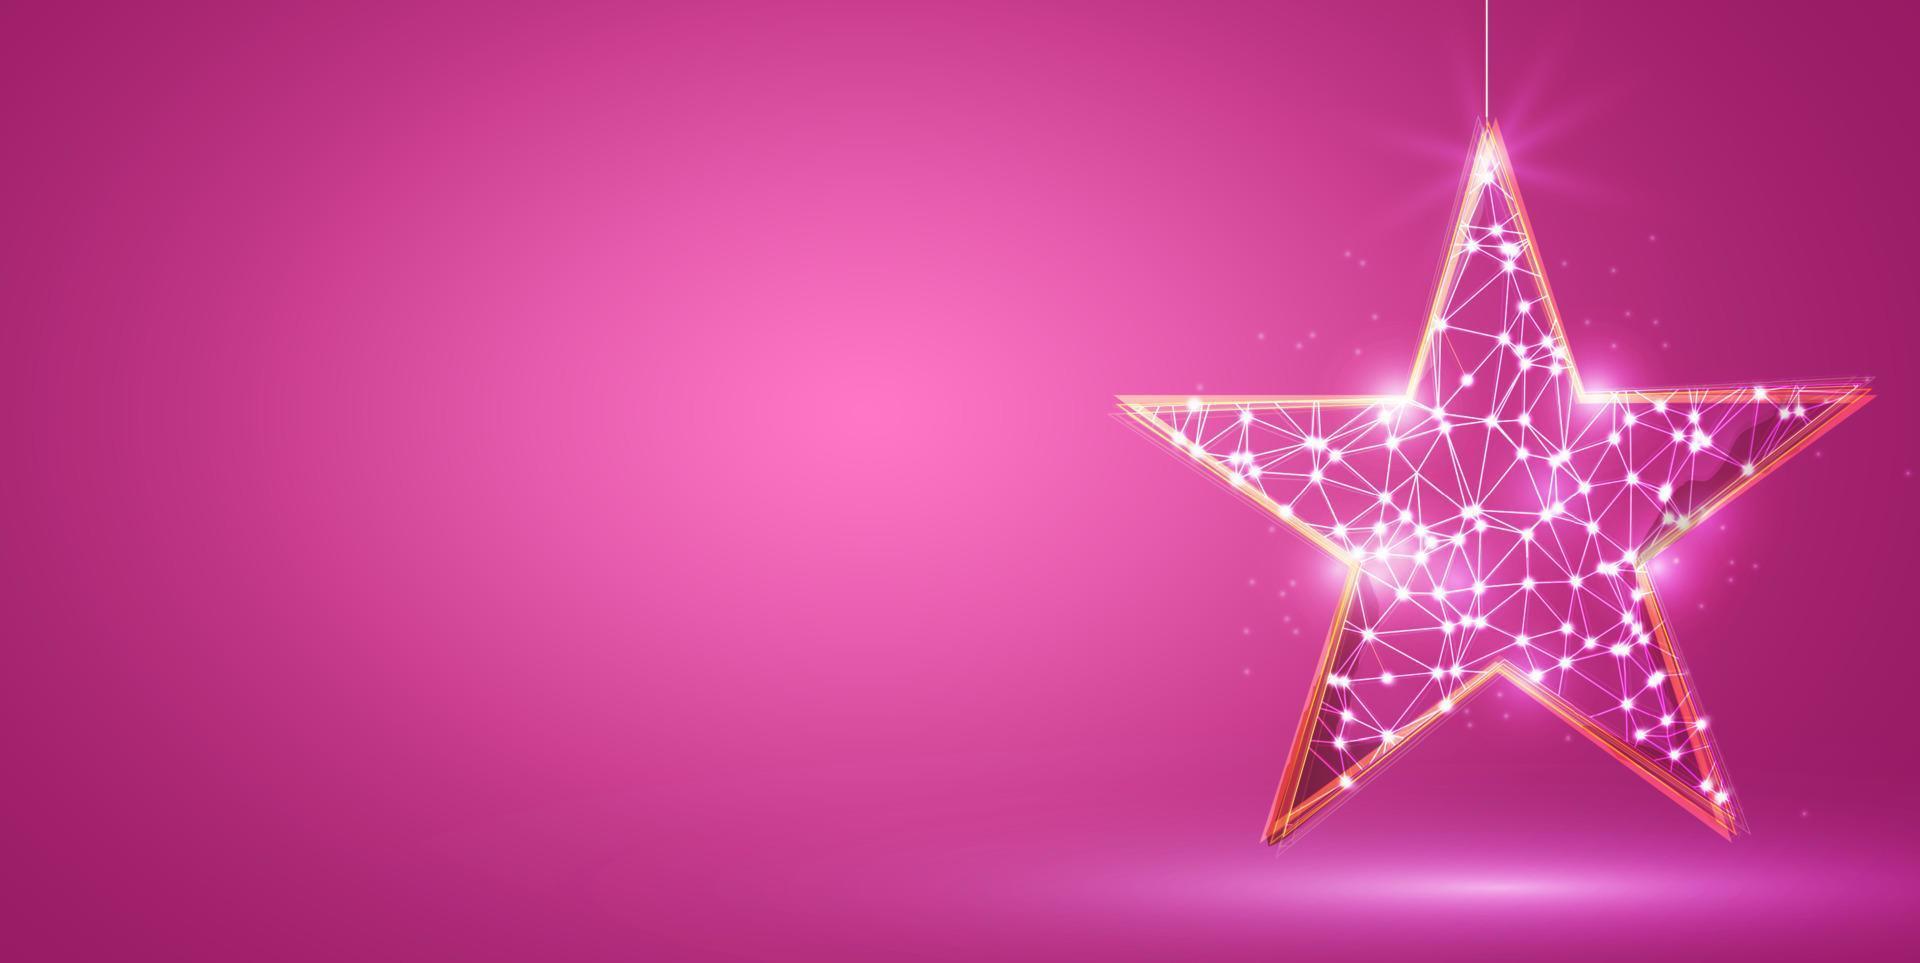 Golden Christmas star with low poly design against pink background vector